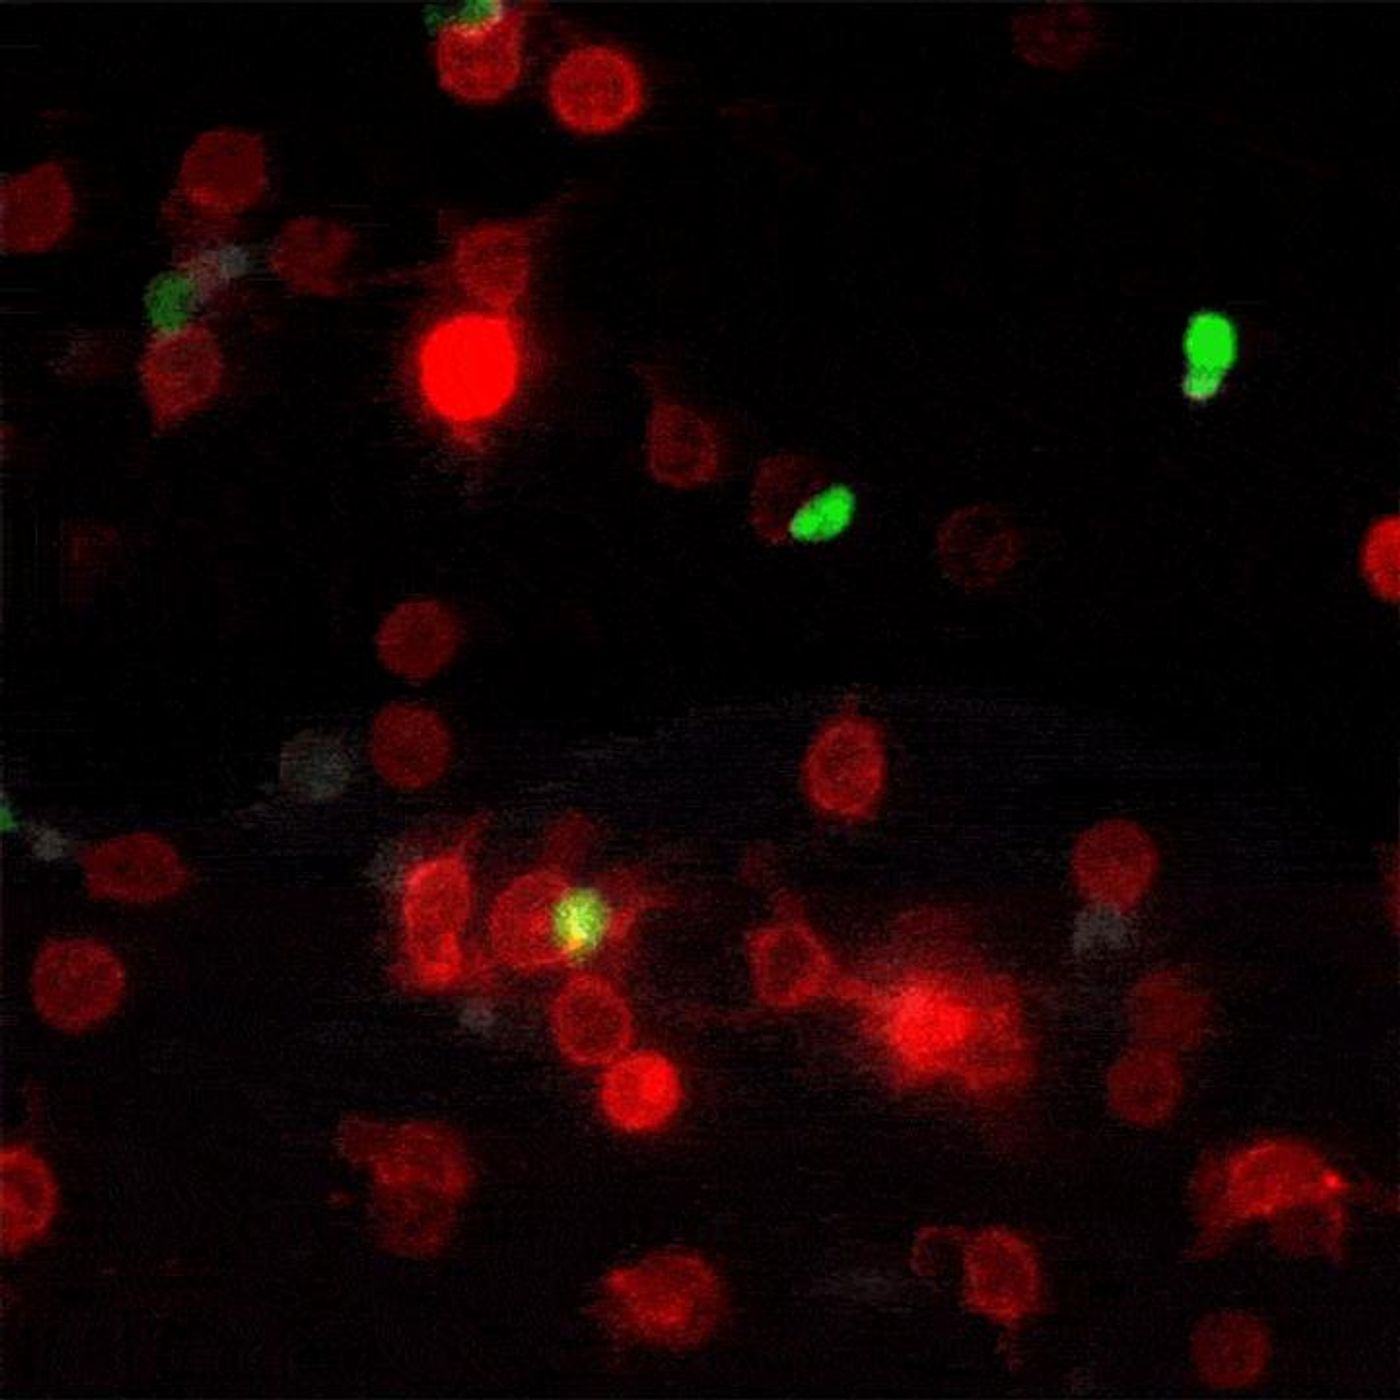 A new labeling technique visualizes brief encounters between dendritic cells (red) and T cells (green). When these cells come into contact, they tag each other with a fluorescent stain (white). Credit: Laboratory of Lymphocyte Dynamics